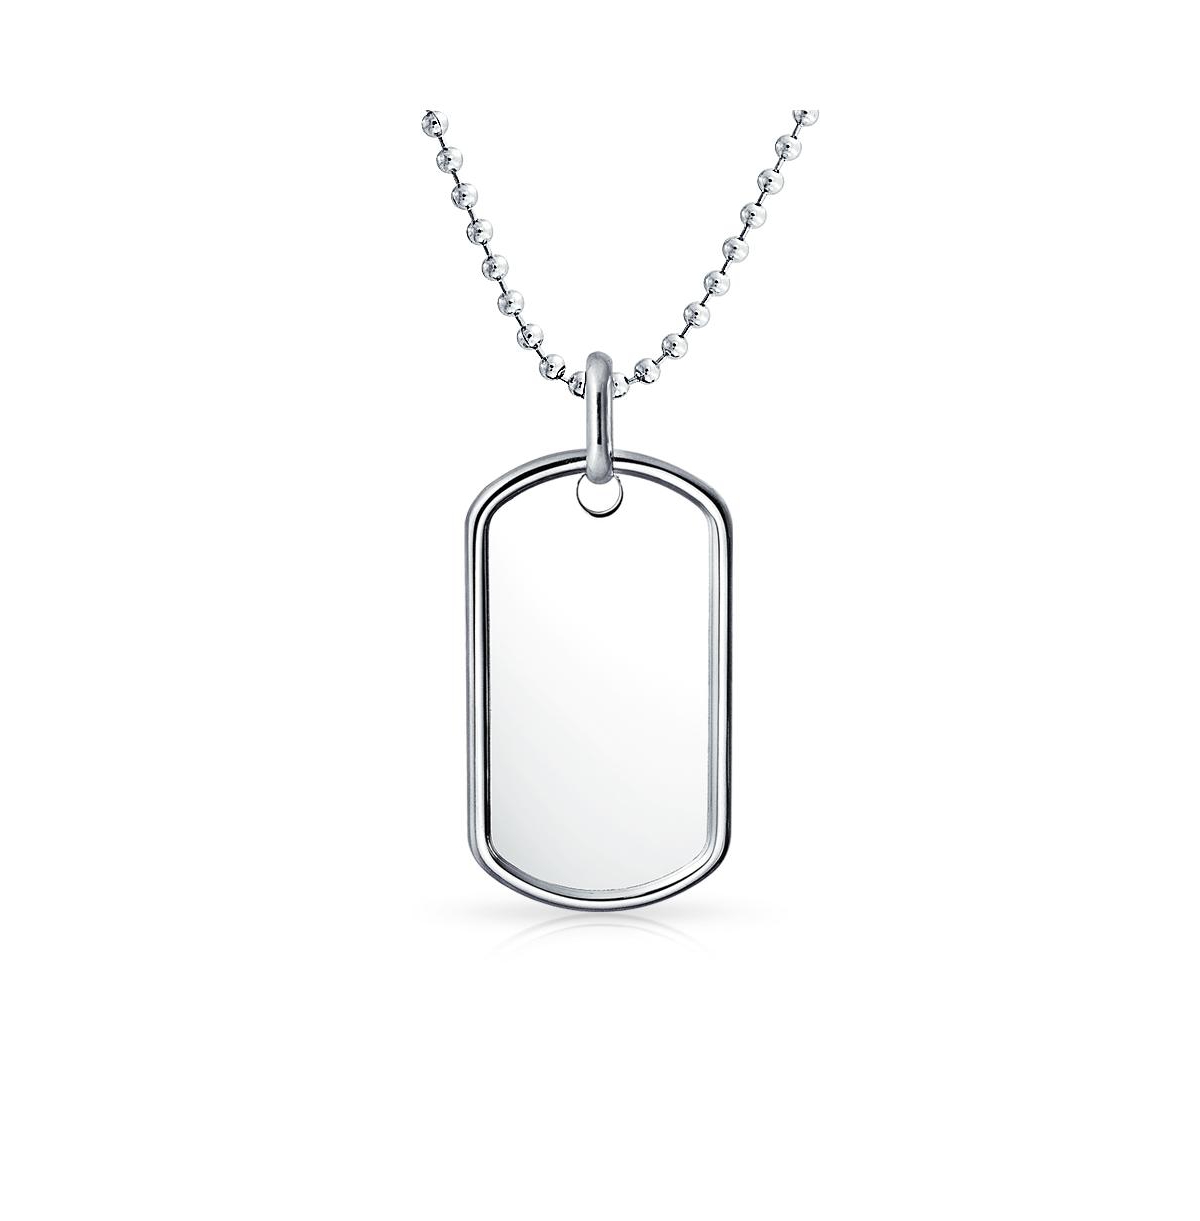 Traditional Mens Medium Army Military Dog Tag Pendant Necklace For Men s .925 Sterling Silver Long Bead Ball Chain 20 Inch - Silver